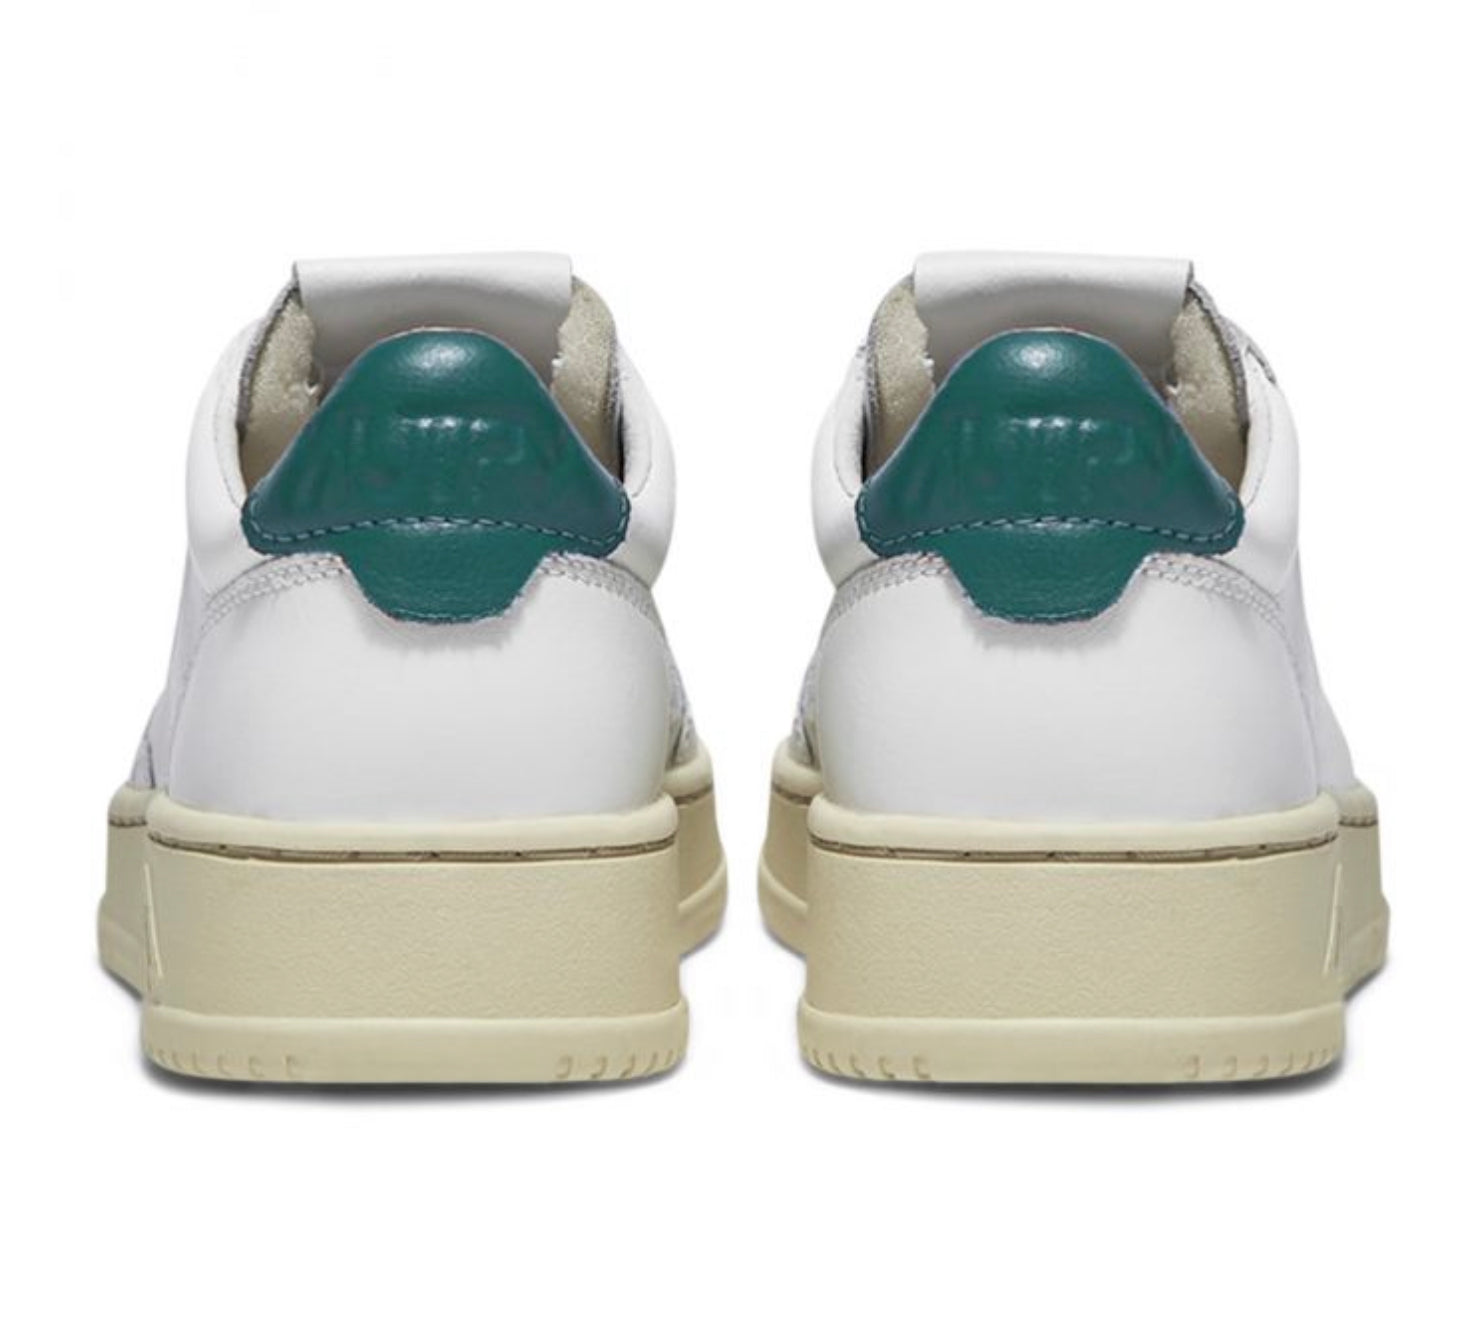 Autry Action Shoes Low Man Leather - White & Petrol (Excluded from discount) , Trainers, Autry, Working Title